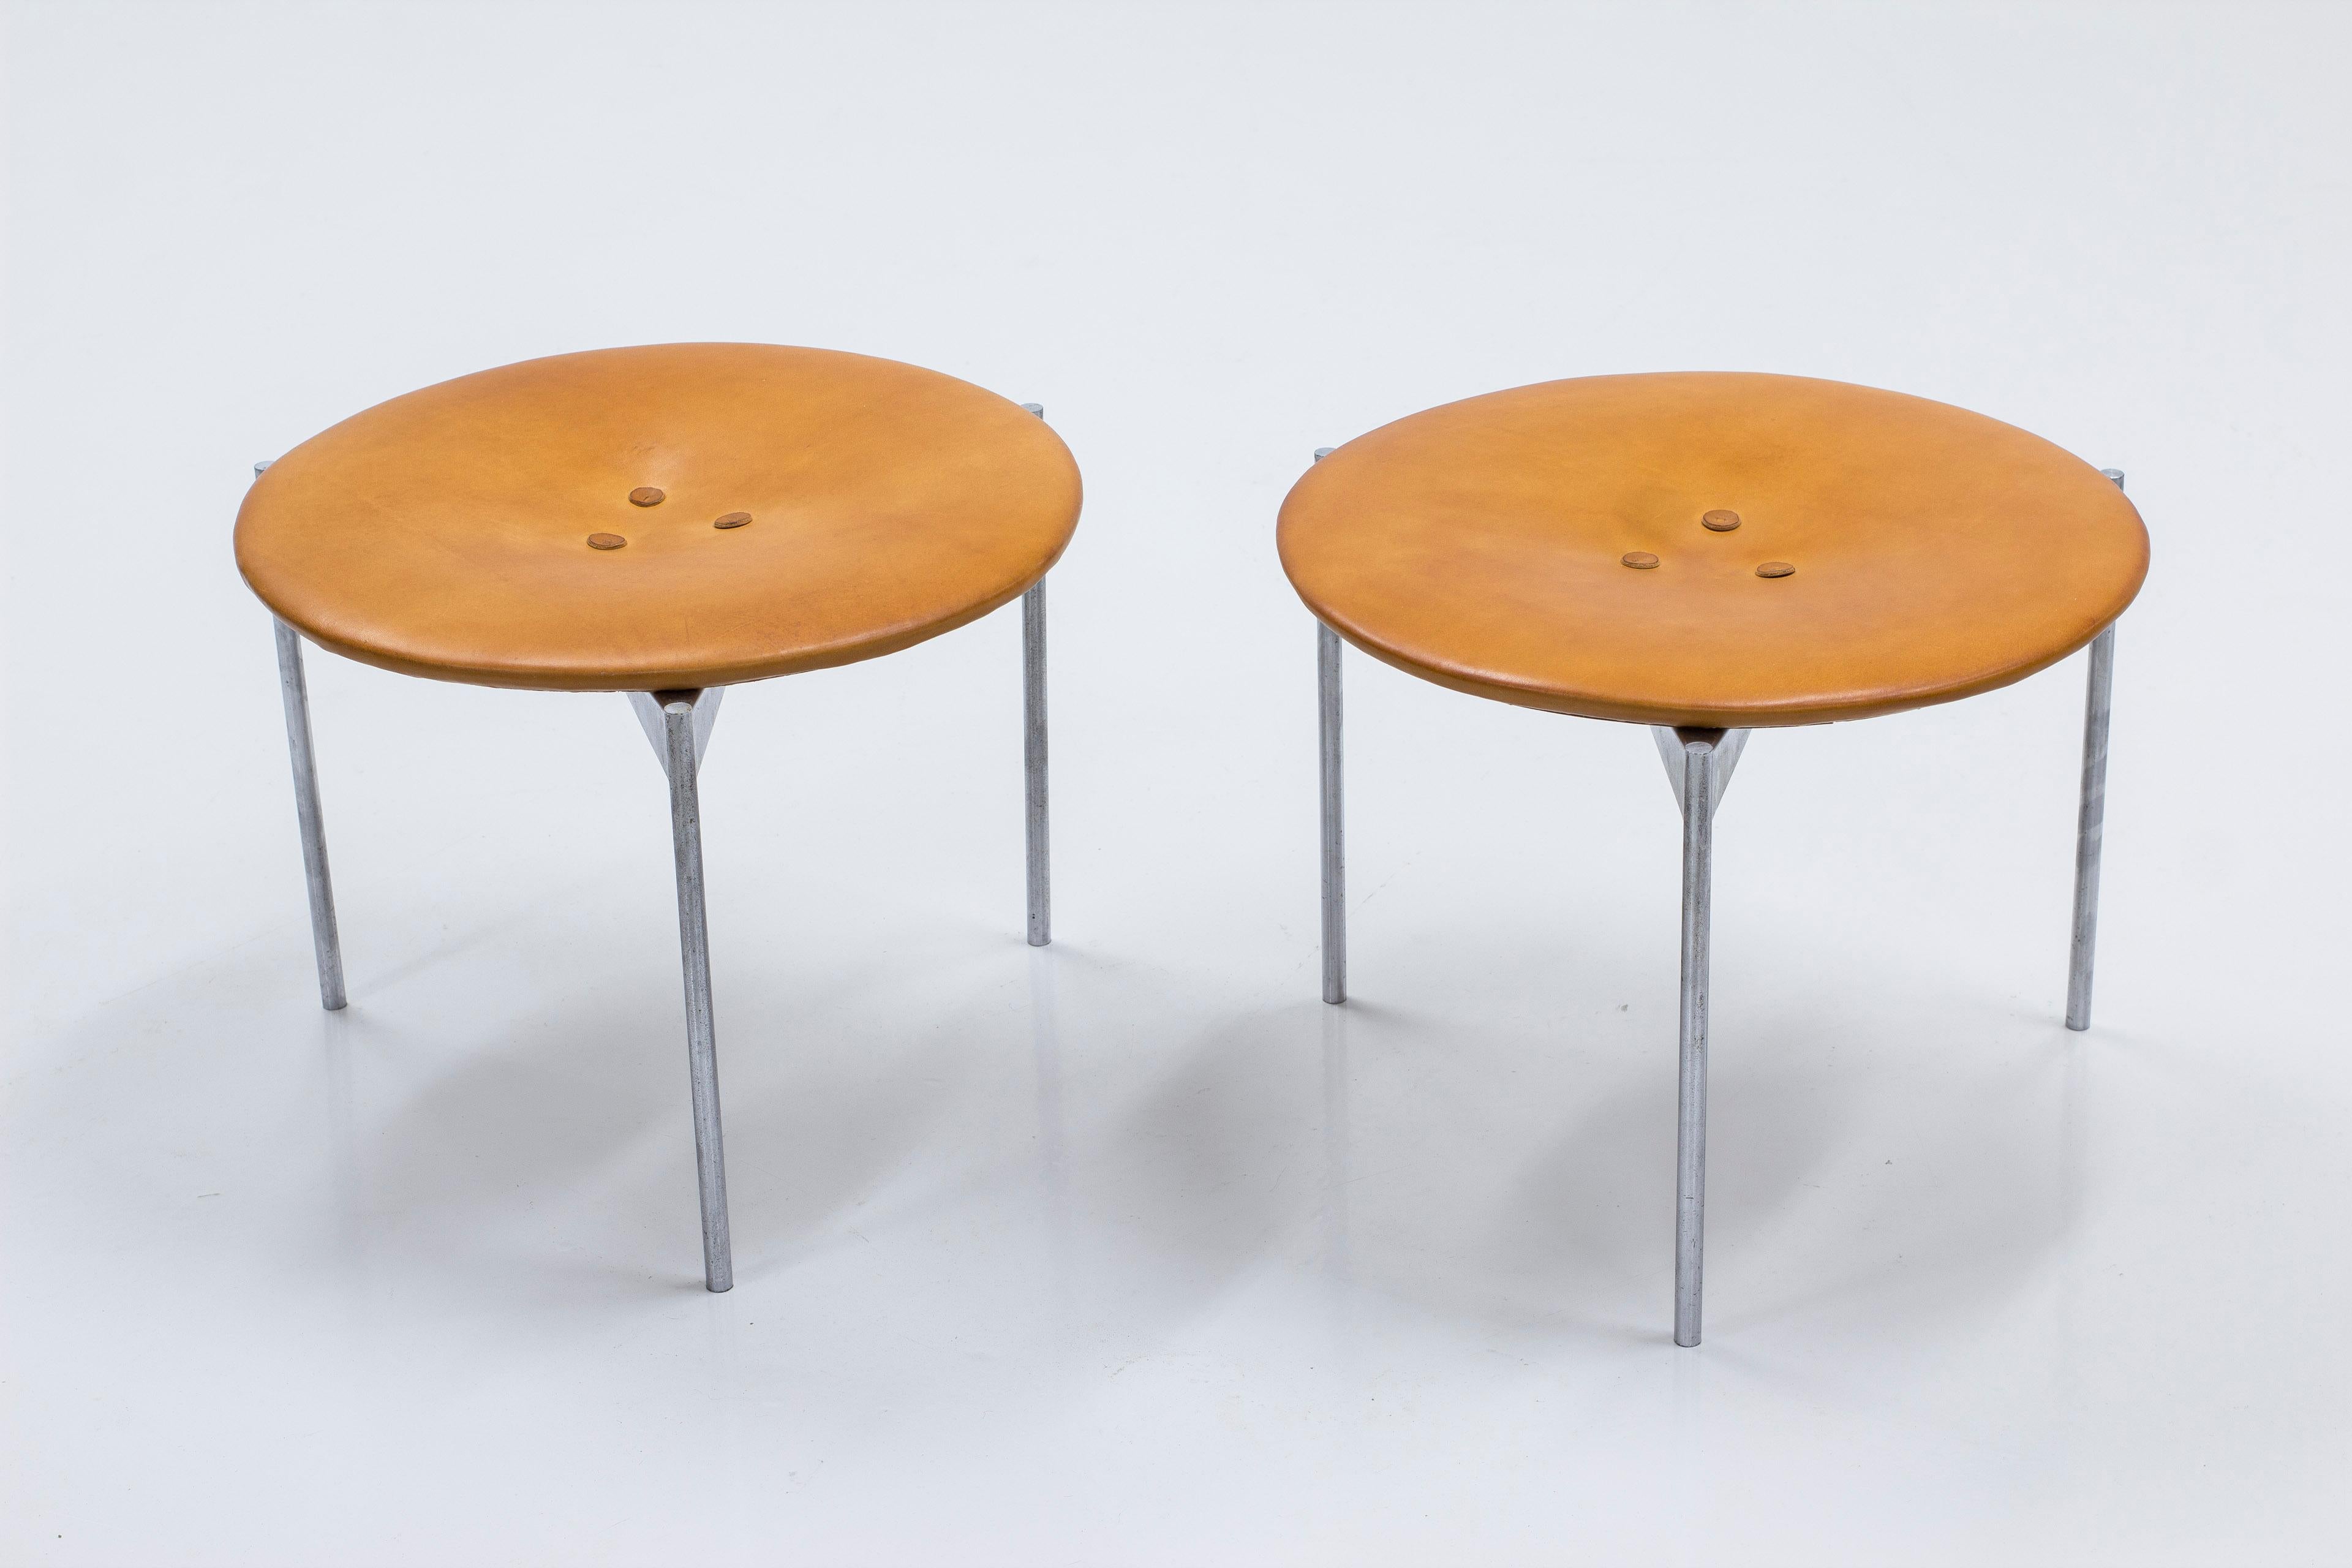 Rare pair of stools designed by Uno & Östen Kristiansson. Produced in Sweden by Luxus during the 1960s. Stainless steel legs and seats reupholstered in cognac leather with a beautiful patina. Very good vintage condition with few signs of wear and